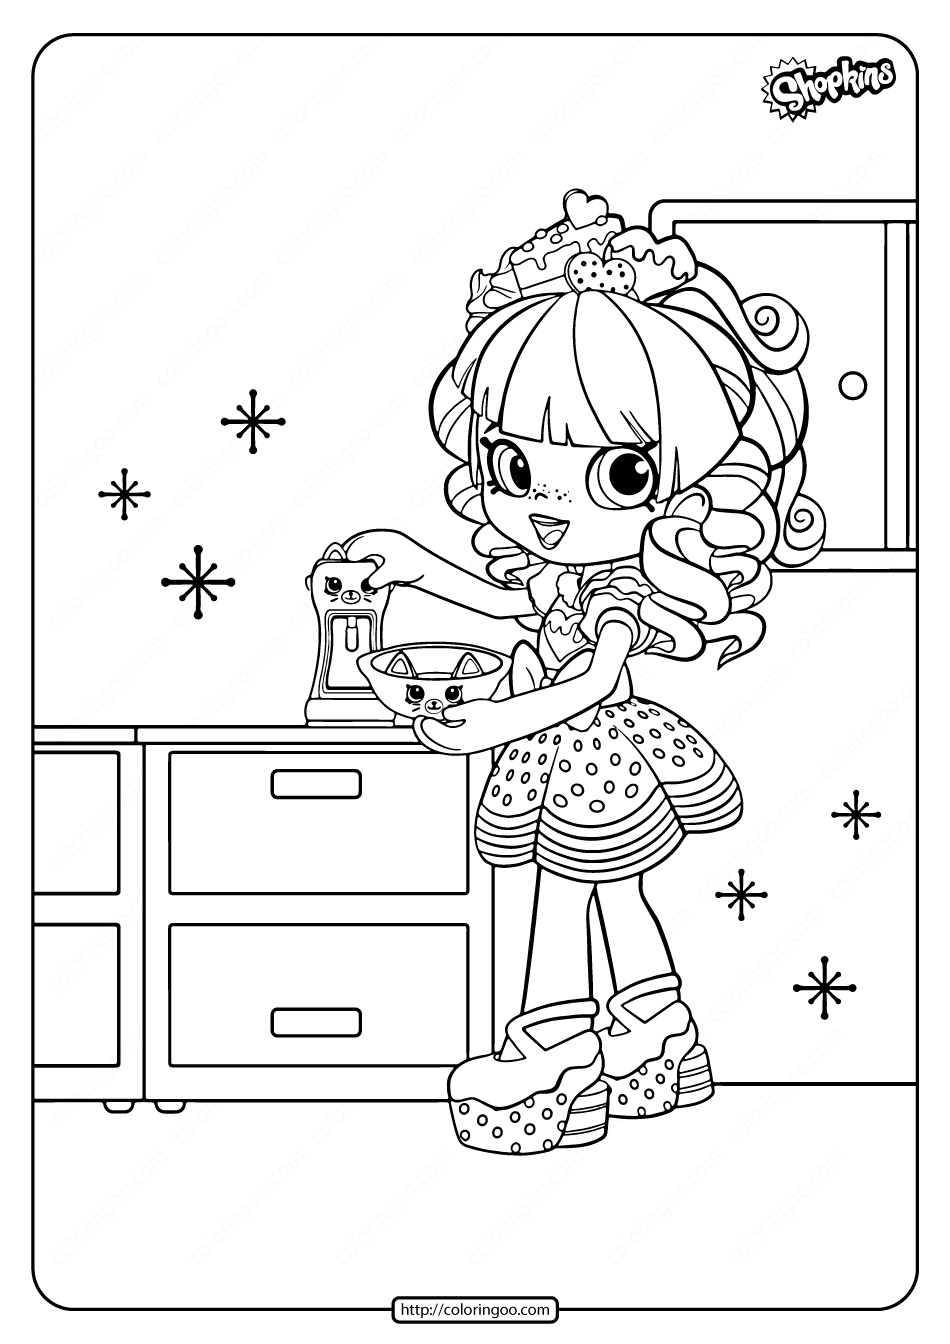 printable shopkins rainbow kate coloring pages